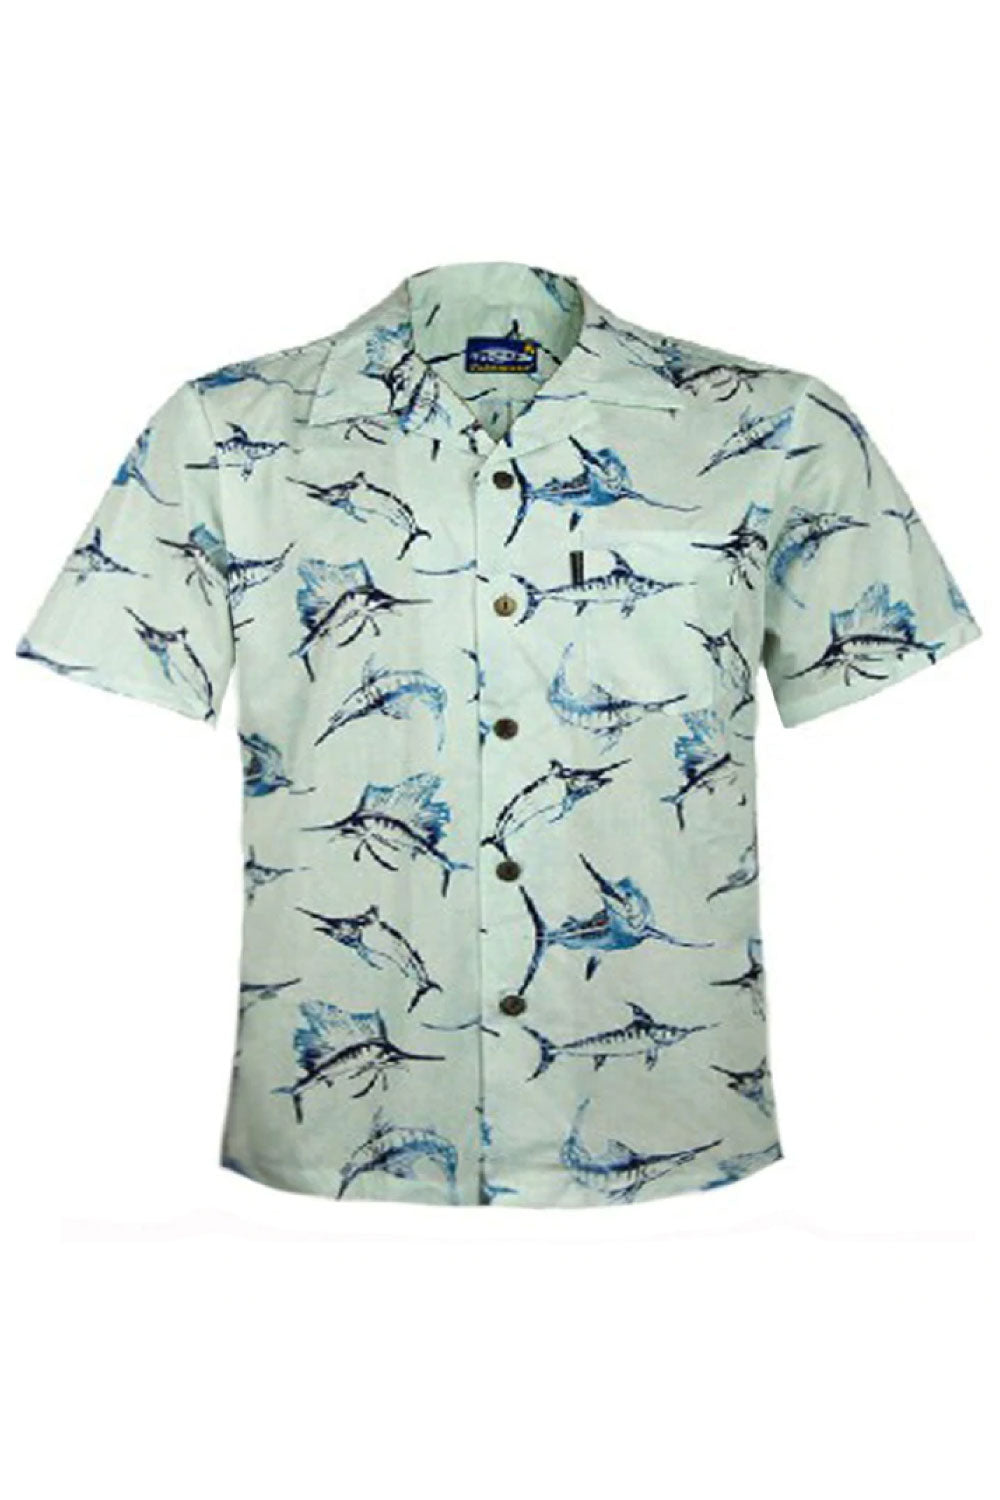 Image of the front of Palmwave's Blue Marlin Aloha Men's Shirt.